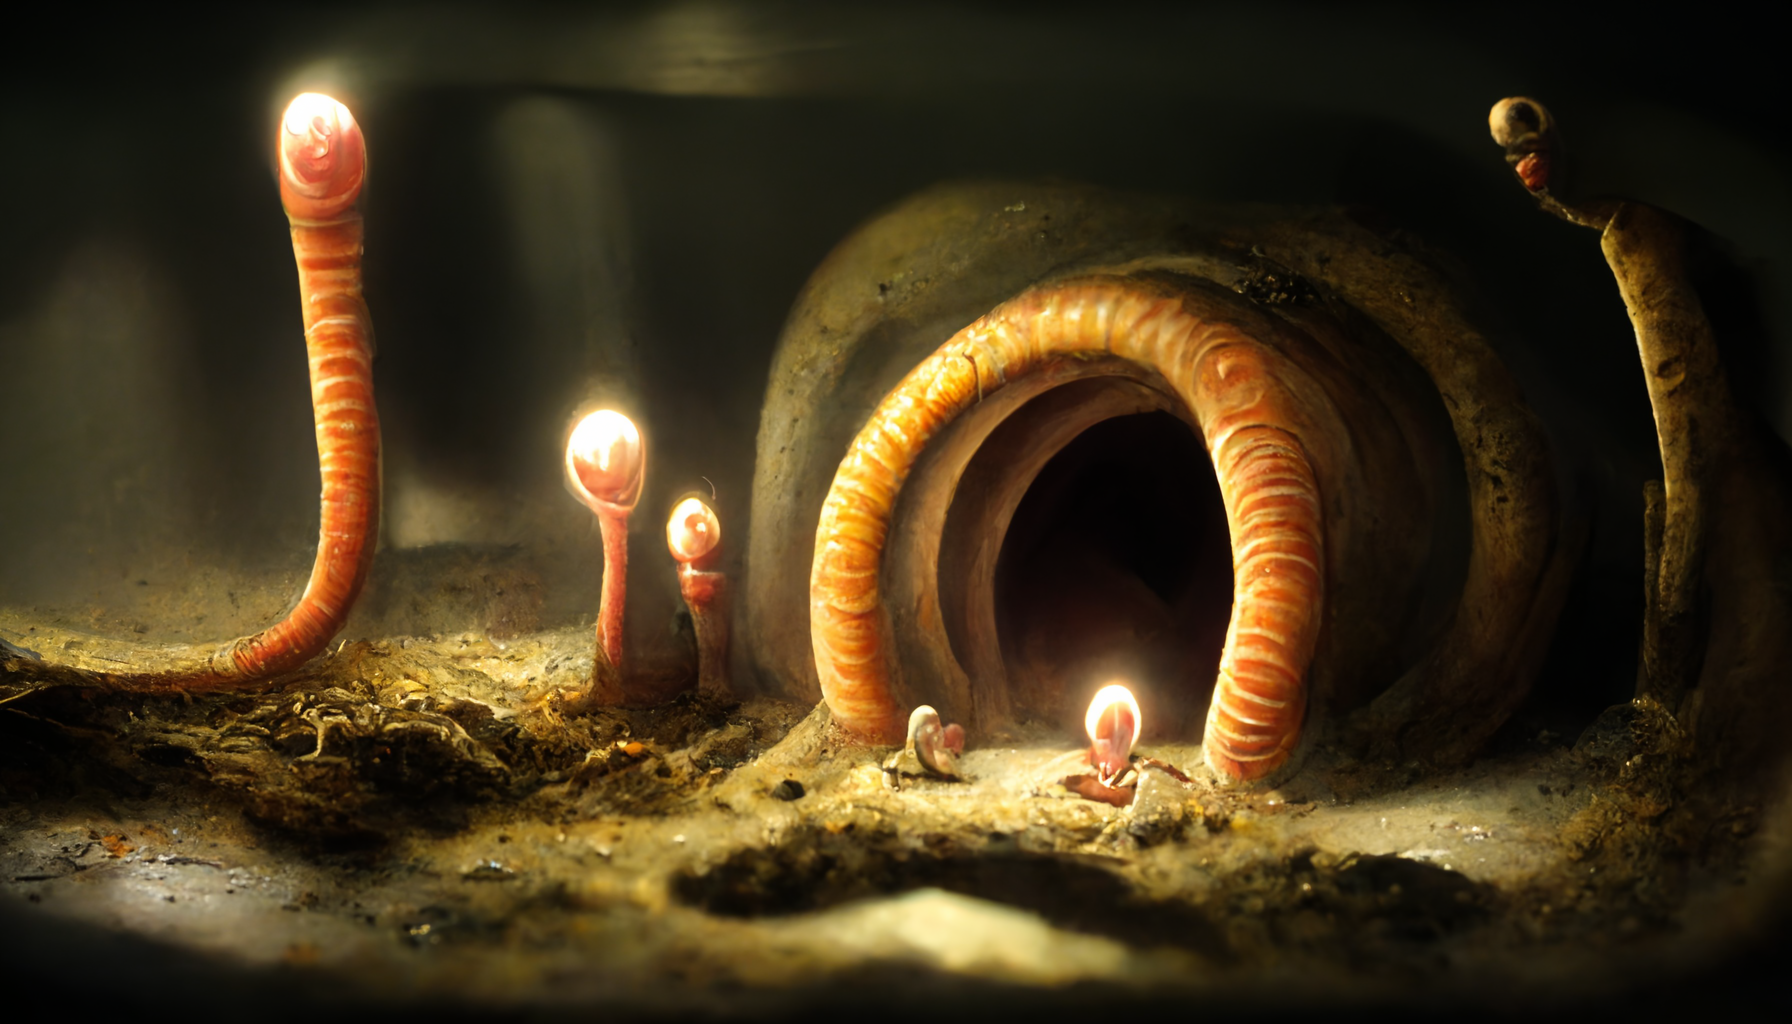 Displaying a file named Grunderwear_an_earthworm_living_in_its_well_lit_home_undergroun_08fde972-4def-4b1d-a15c-bf779e3092c5.png